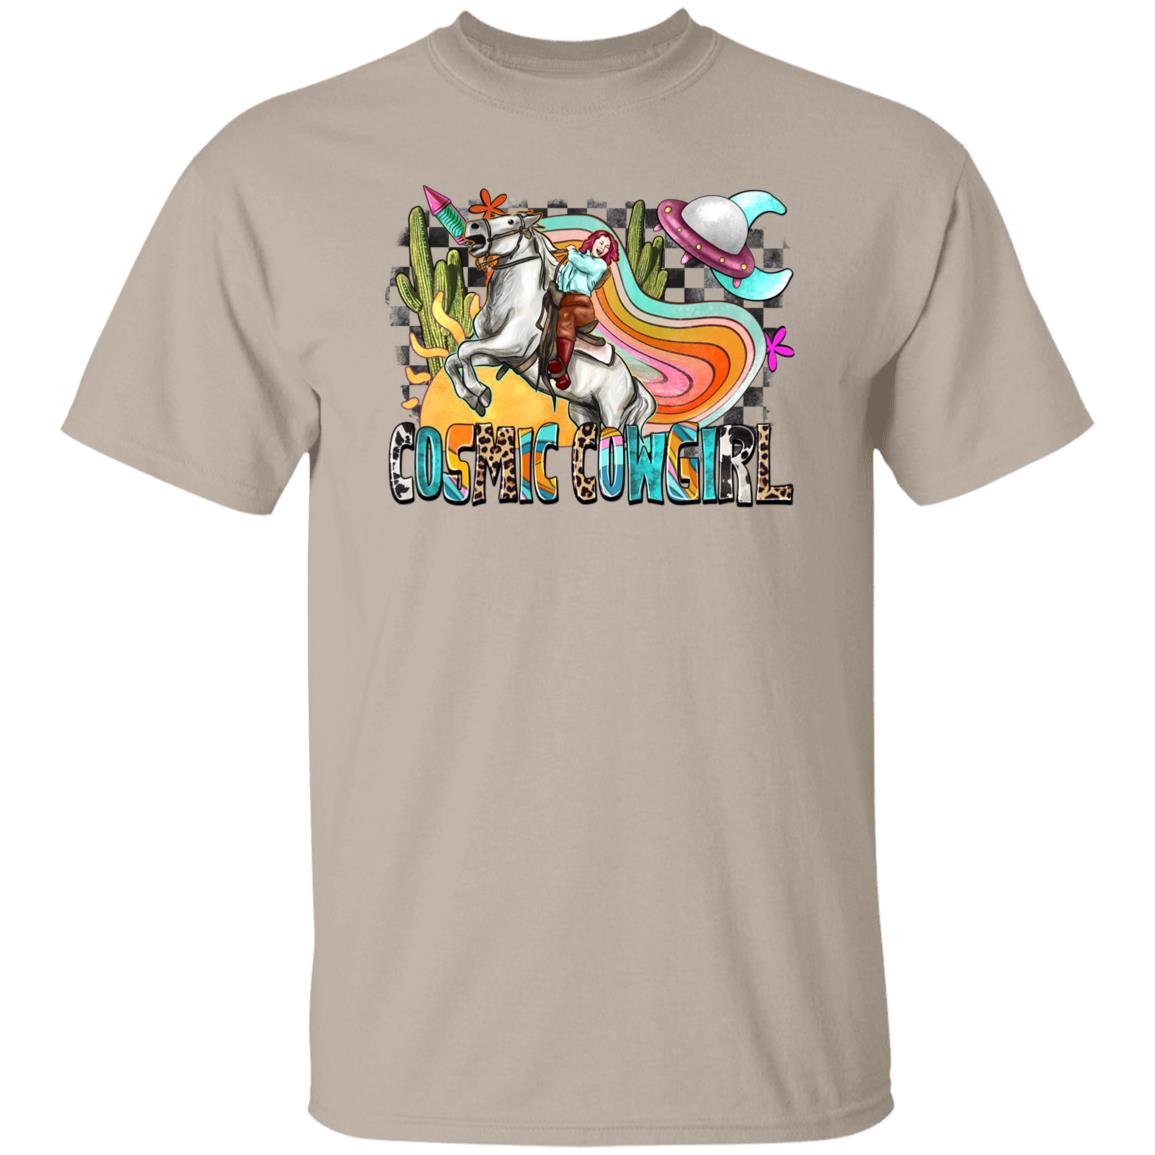 Cosmic cowgirl T-Shirt Alien Texas Western horse cowgirl Unisex tee White Sand Sport Grey-Family-Gift-Planet